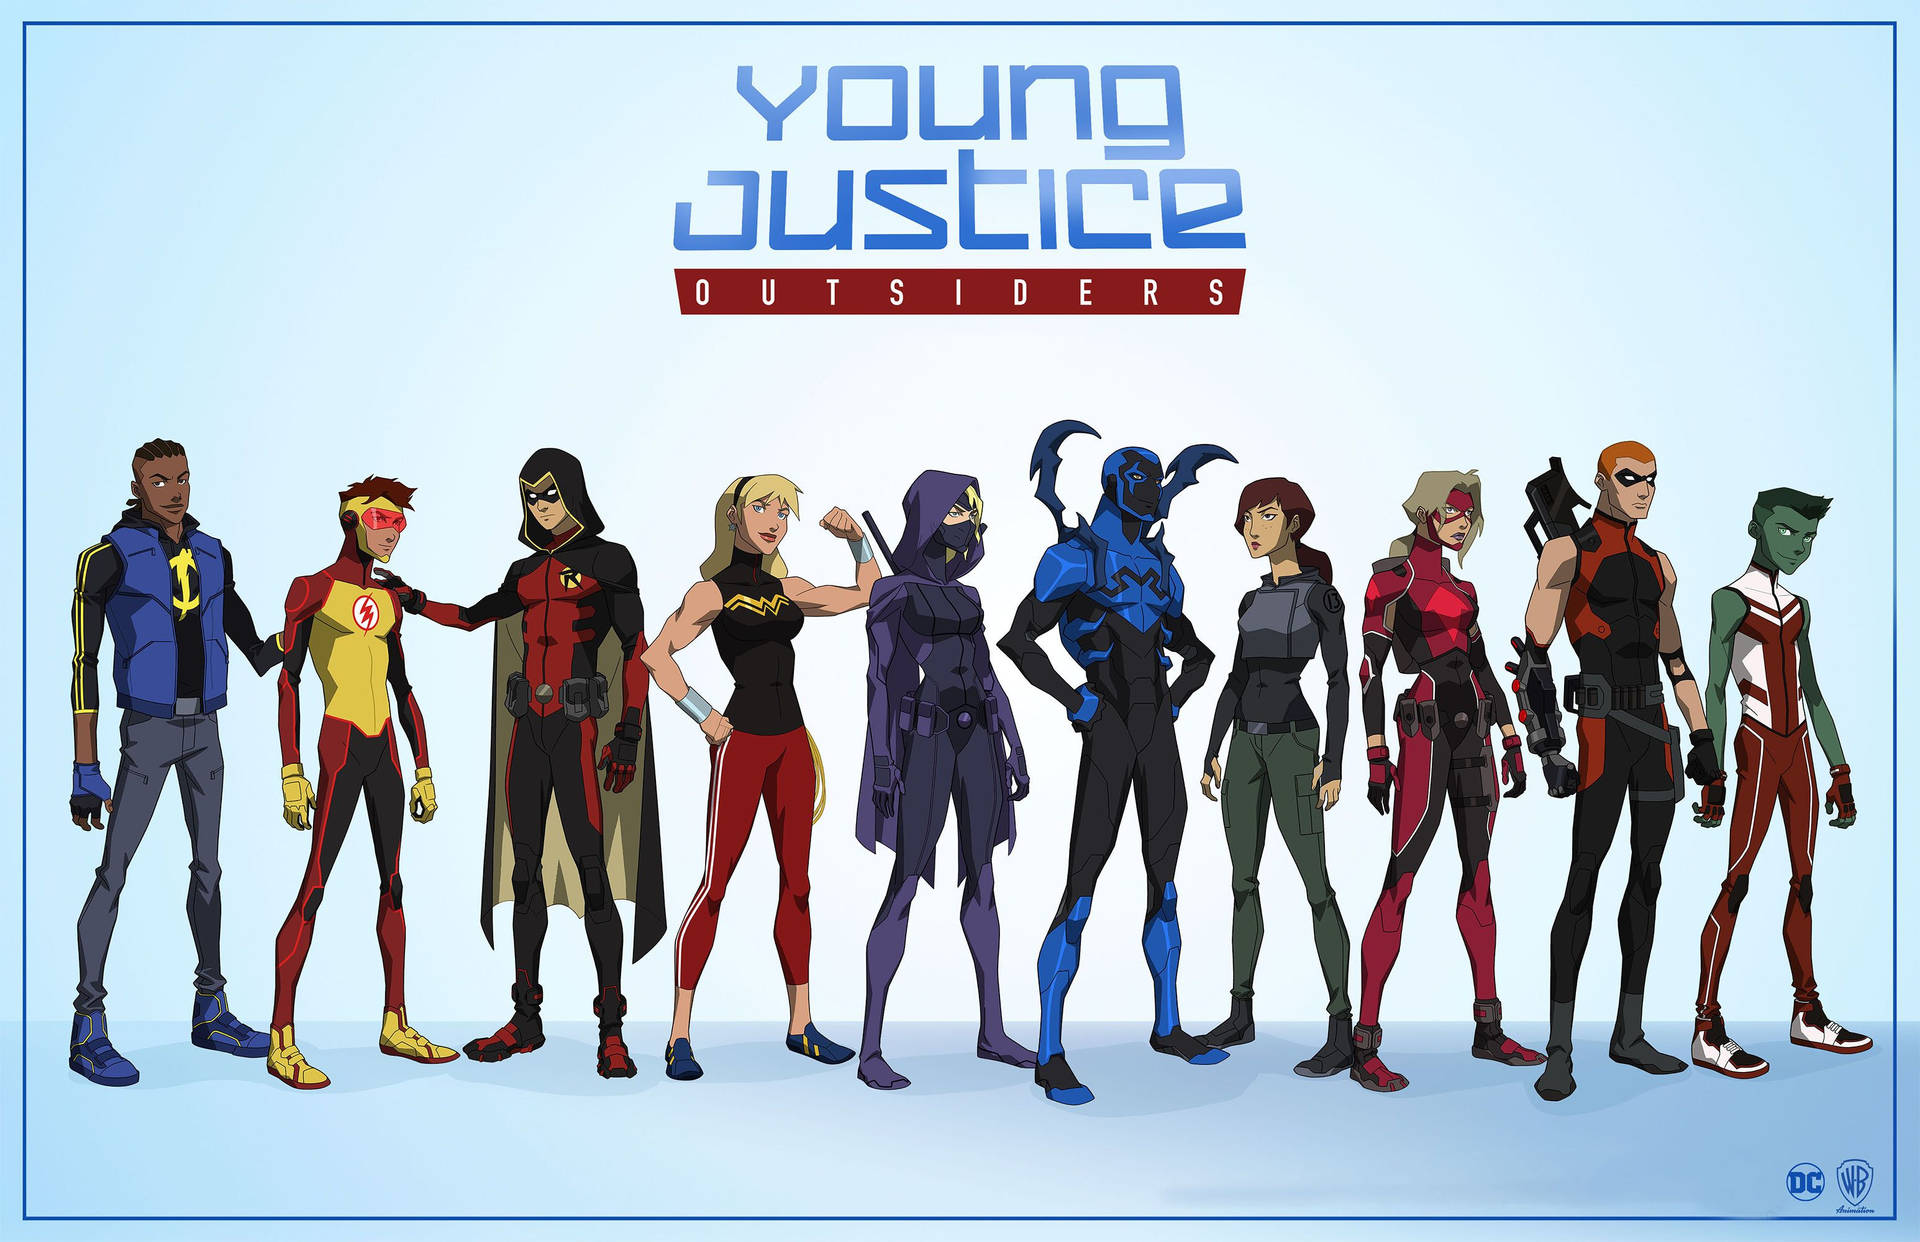 Top 999+ Young Justice Wallpaper Full HD, 4K✅Free to Use